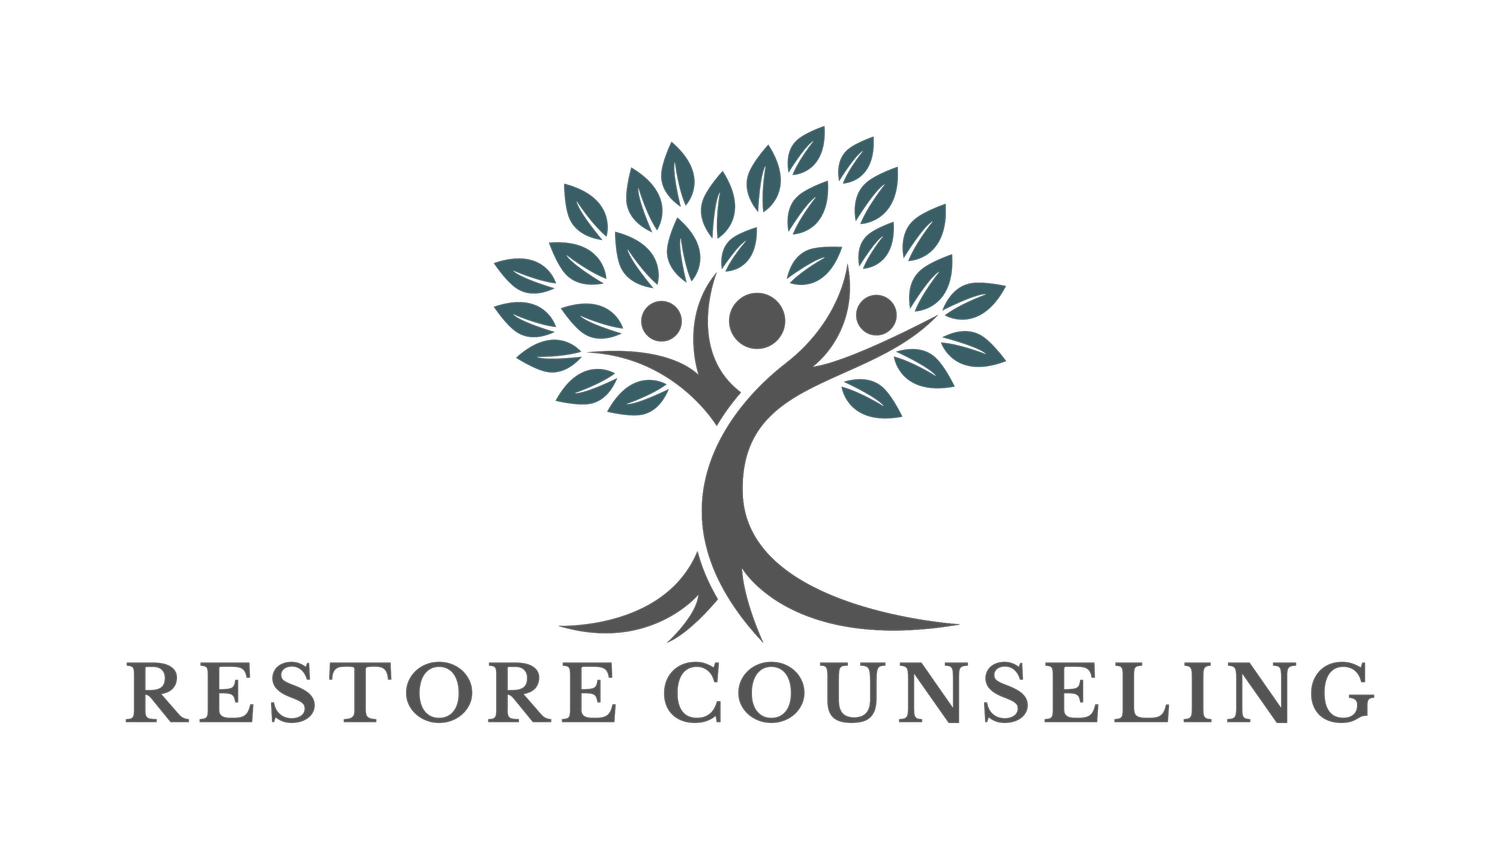 Restore Counseling